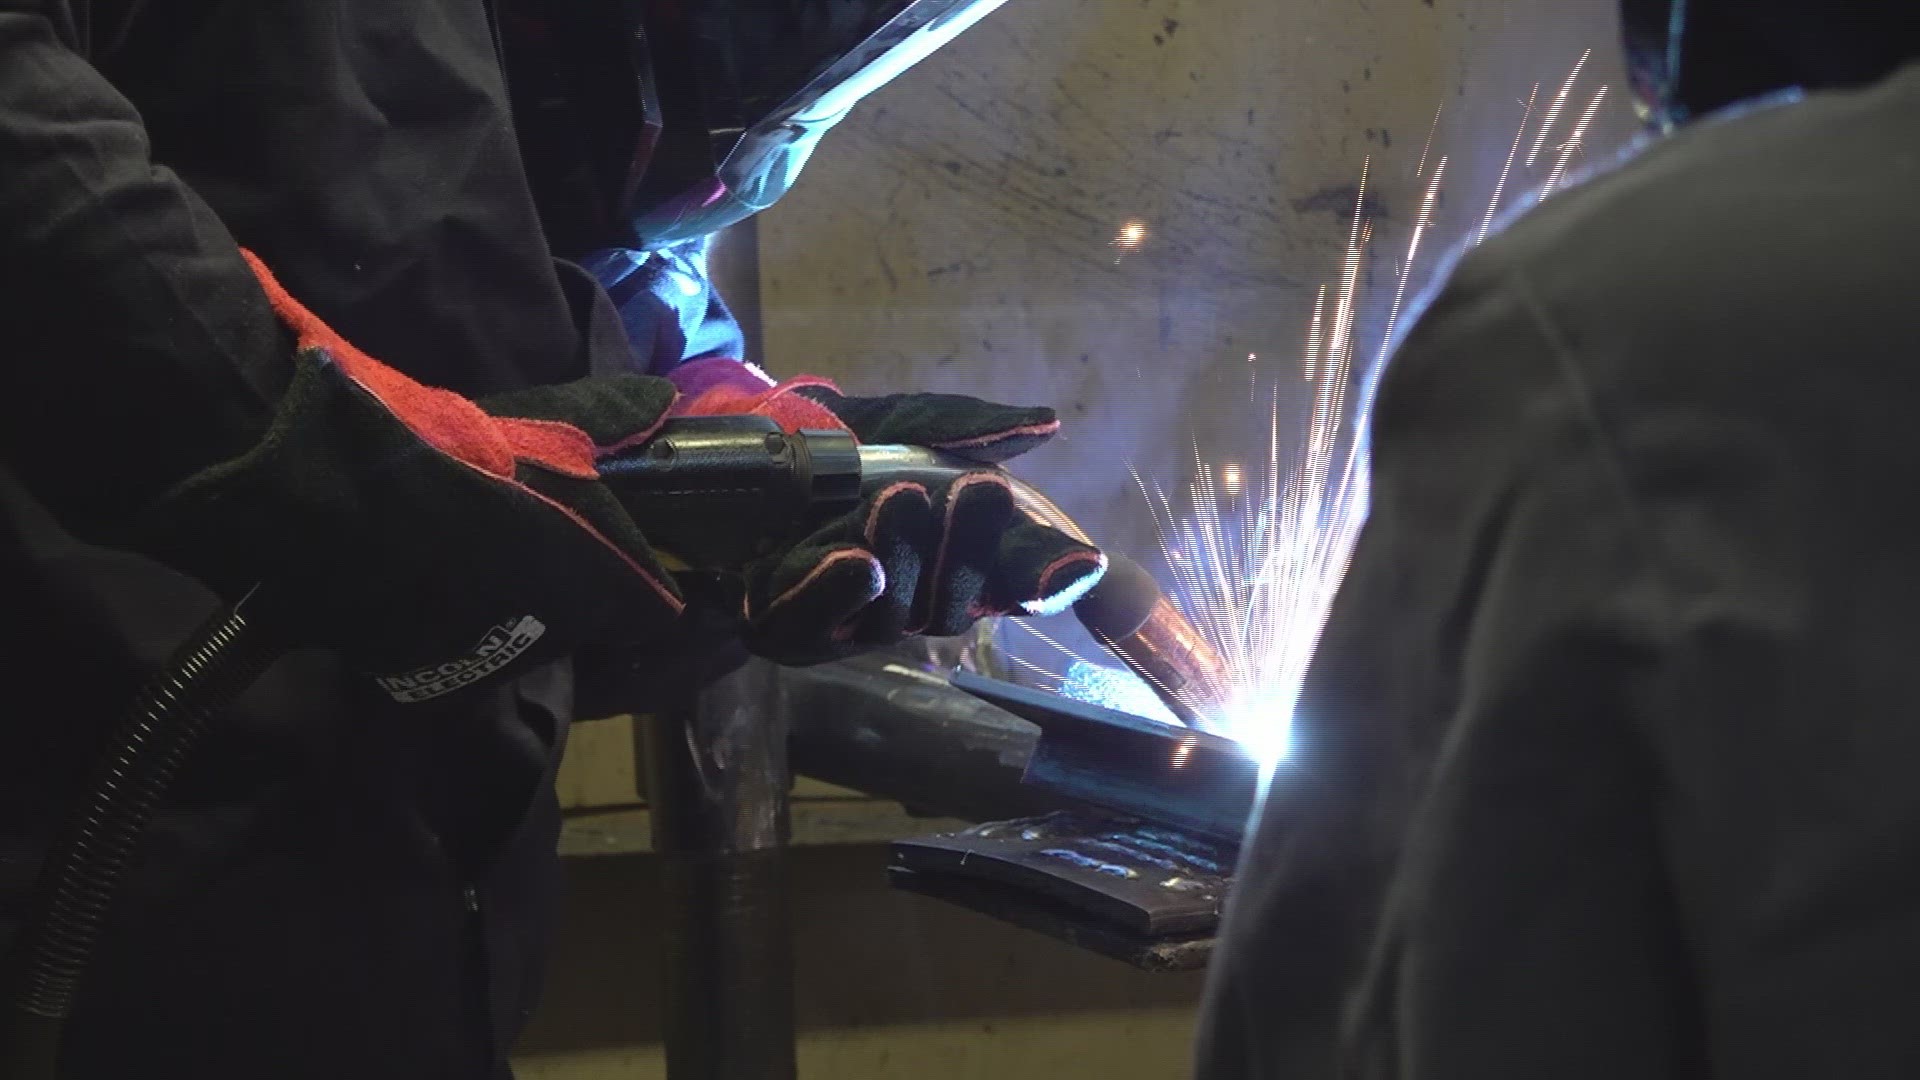 Girls applying to this camp can learn more about welding and electrical technology careers.